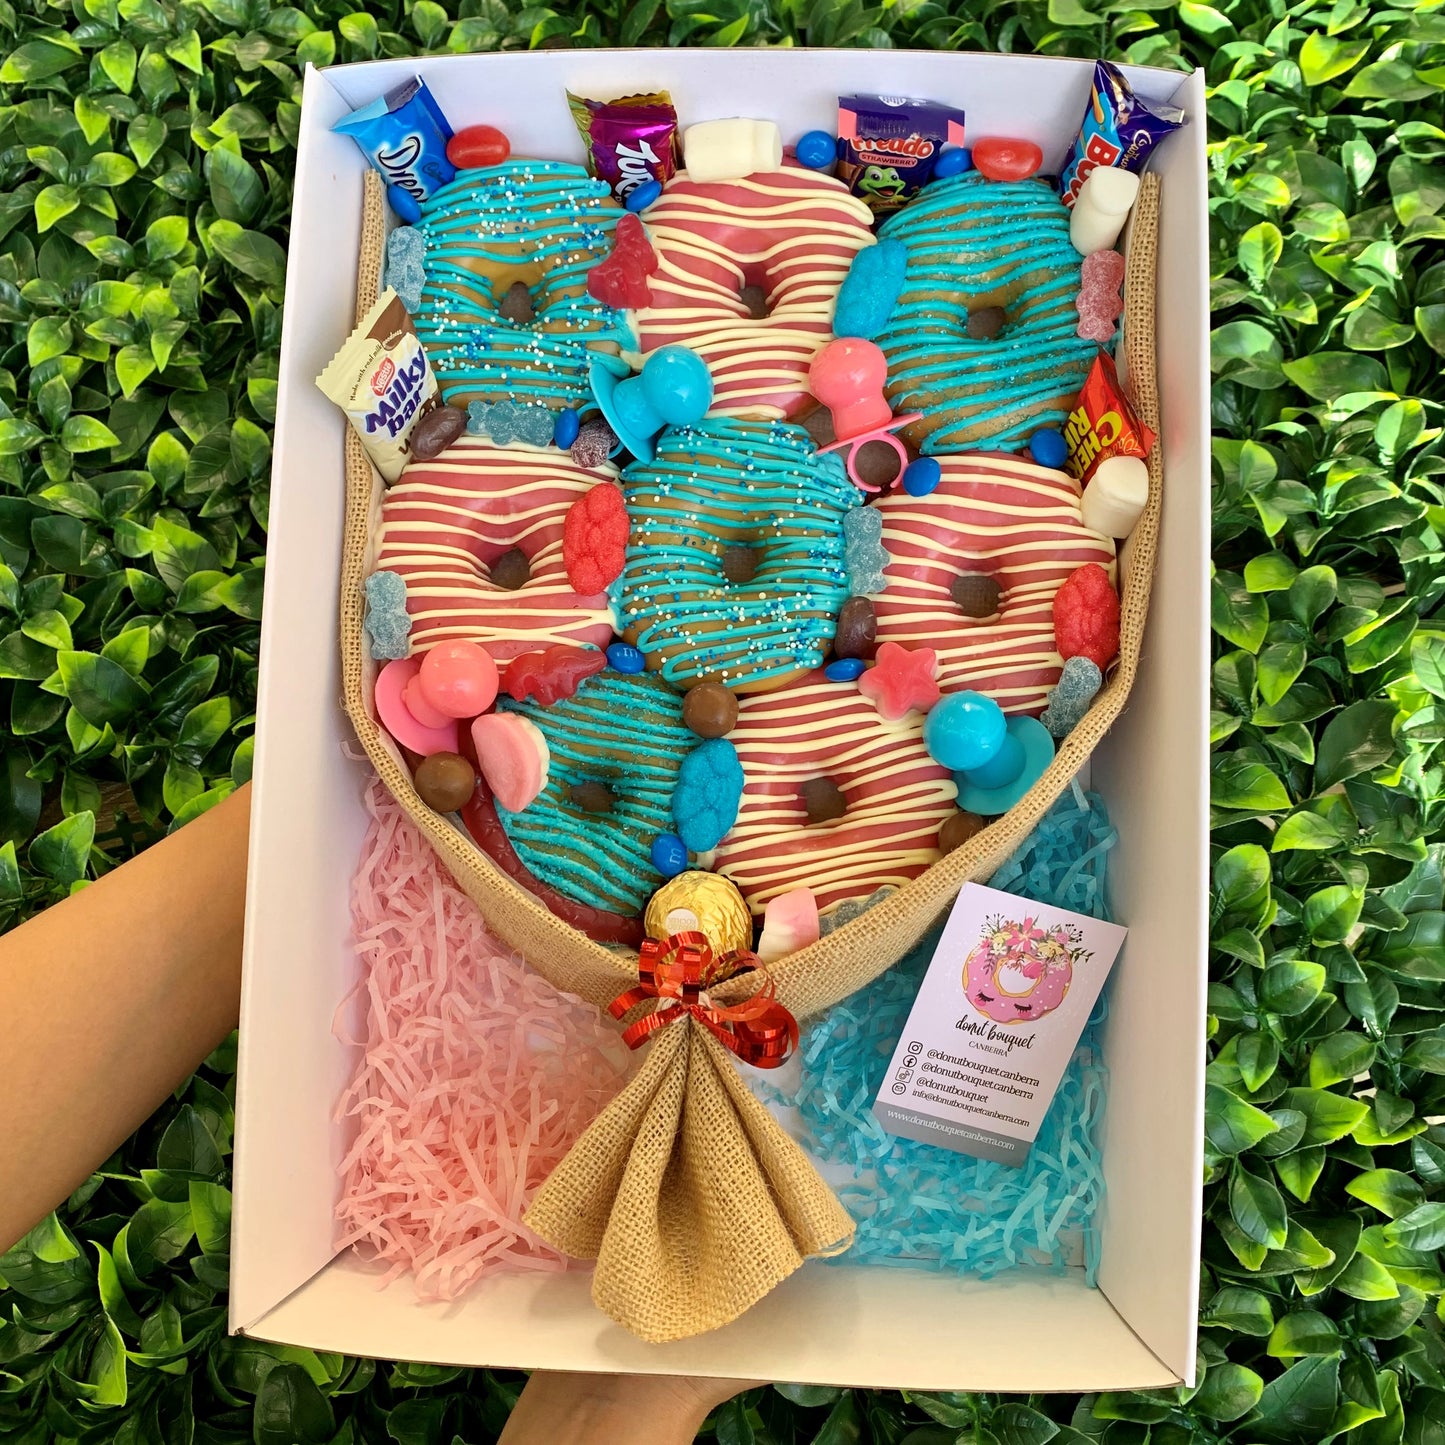 Gender reveal cakes can be very expensive. Our donut bouquets are not only creative but also an affordable gift for those looking for gender reveal gift ideas! If you prefer a different, unique gift option for new parents instead of gender reveal cupcakes or a gender reveal cake, order a donut bouquet with us.